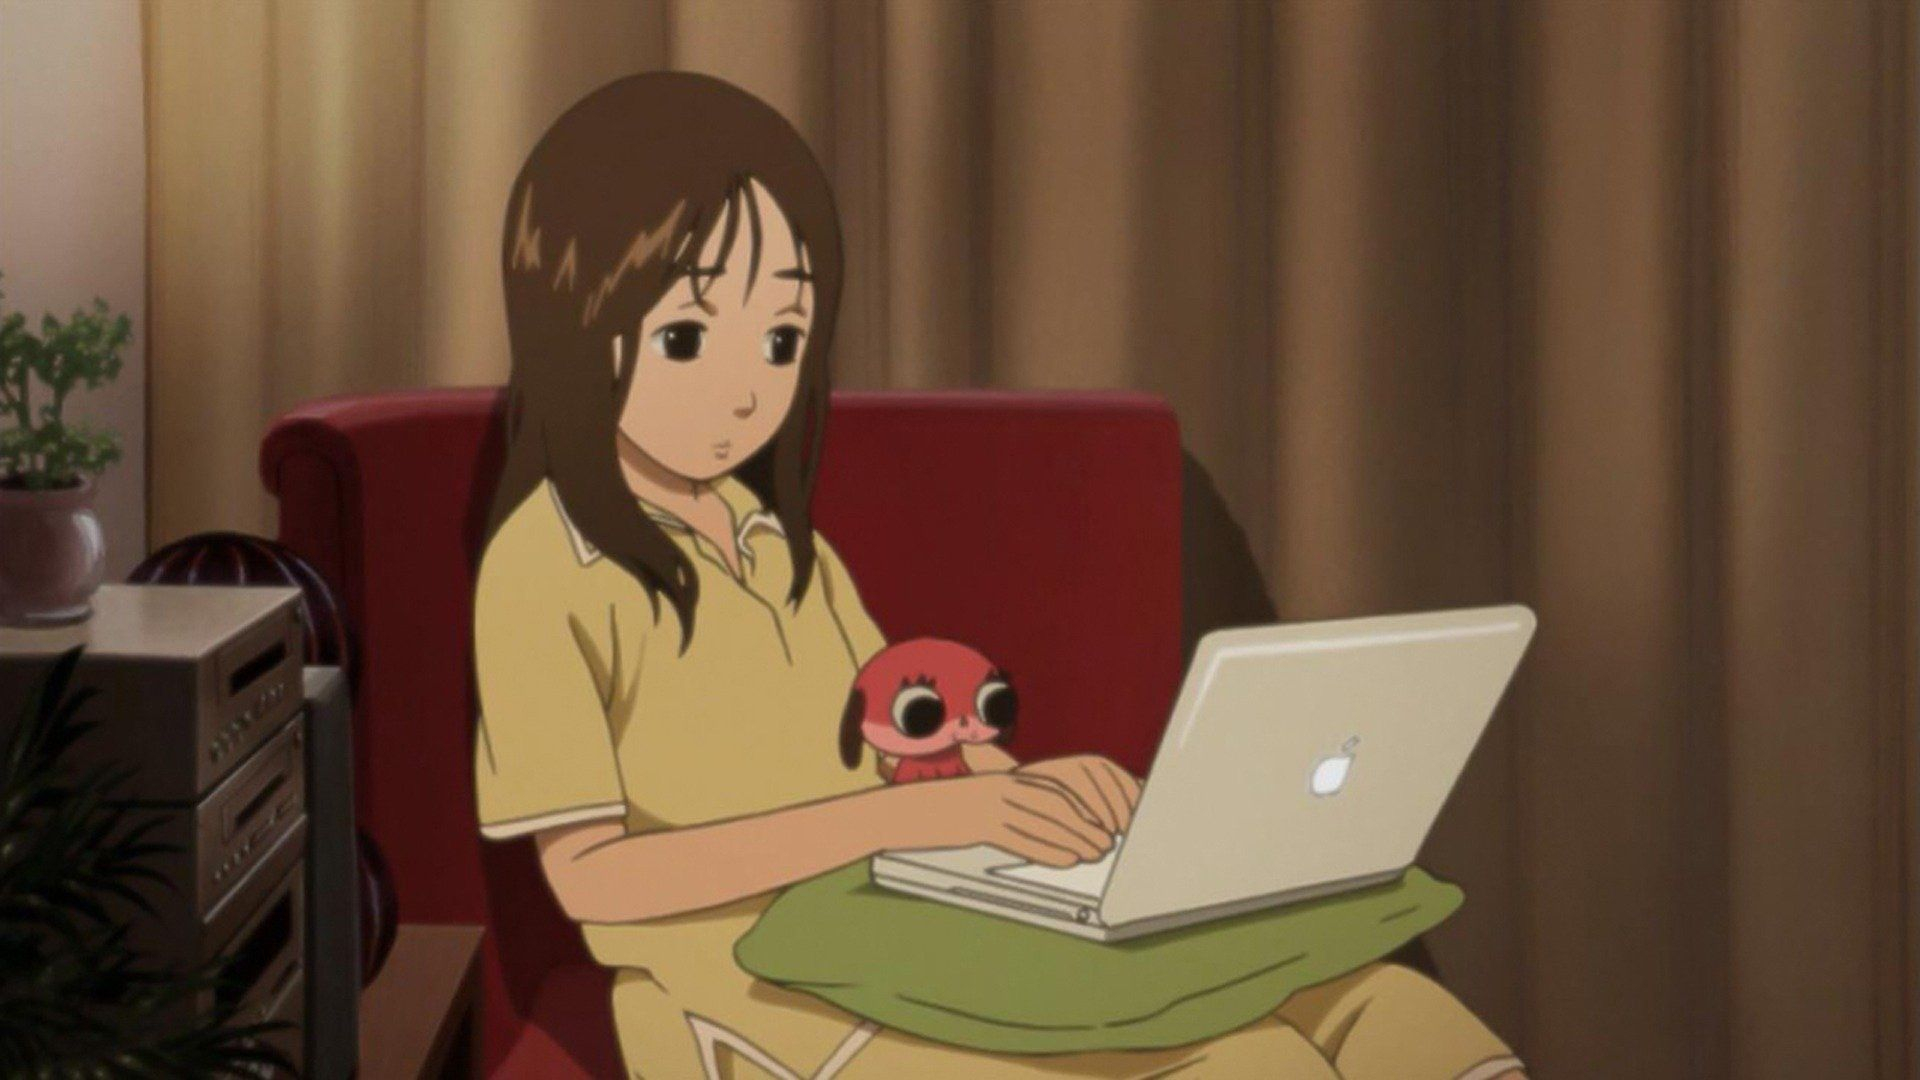 1920x1080 Paranoia Agent Where to Watch Every Episode Streaming Online Available in the UK | Reelgood